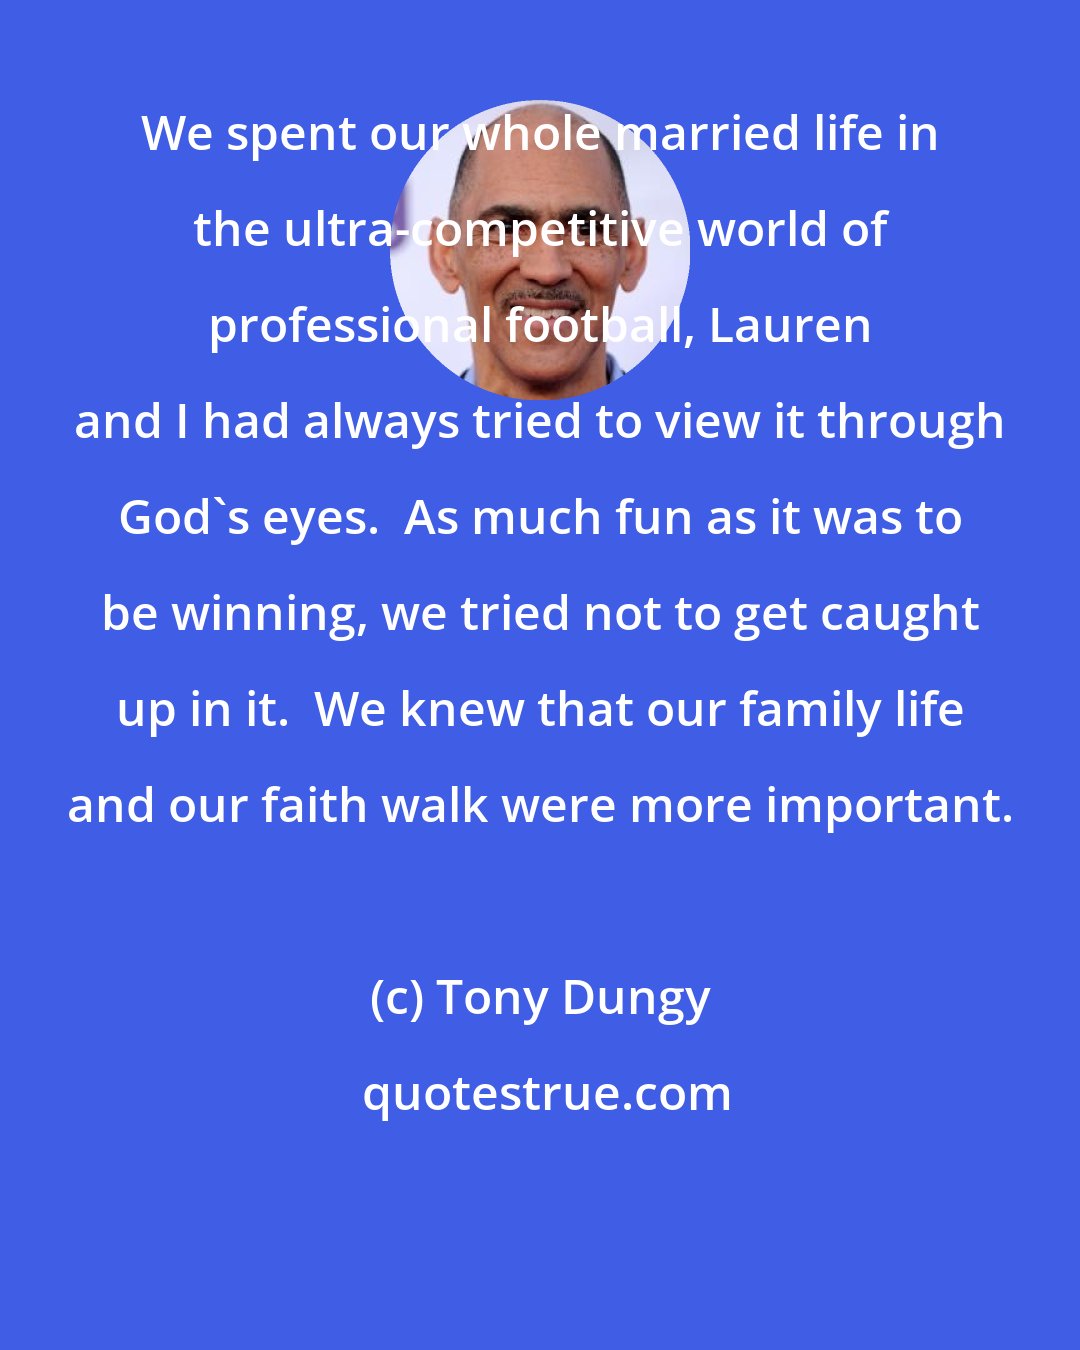 Tony Dungy: We spent our whole married life in the ultra-competitive world of professional football, Lauren and I had always tried to view it through God's eyes.  As much fun as it was to be winning, we tried not to get caught up in it.  We knew that our family life and our faith walk were more important.